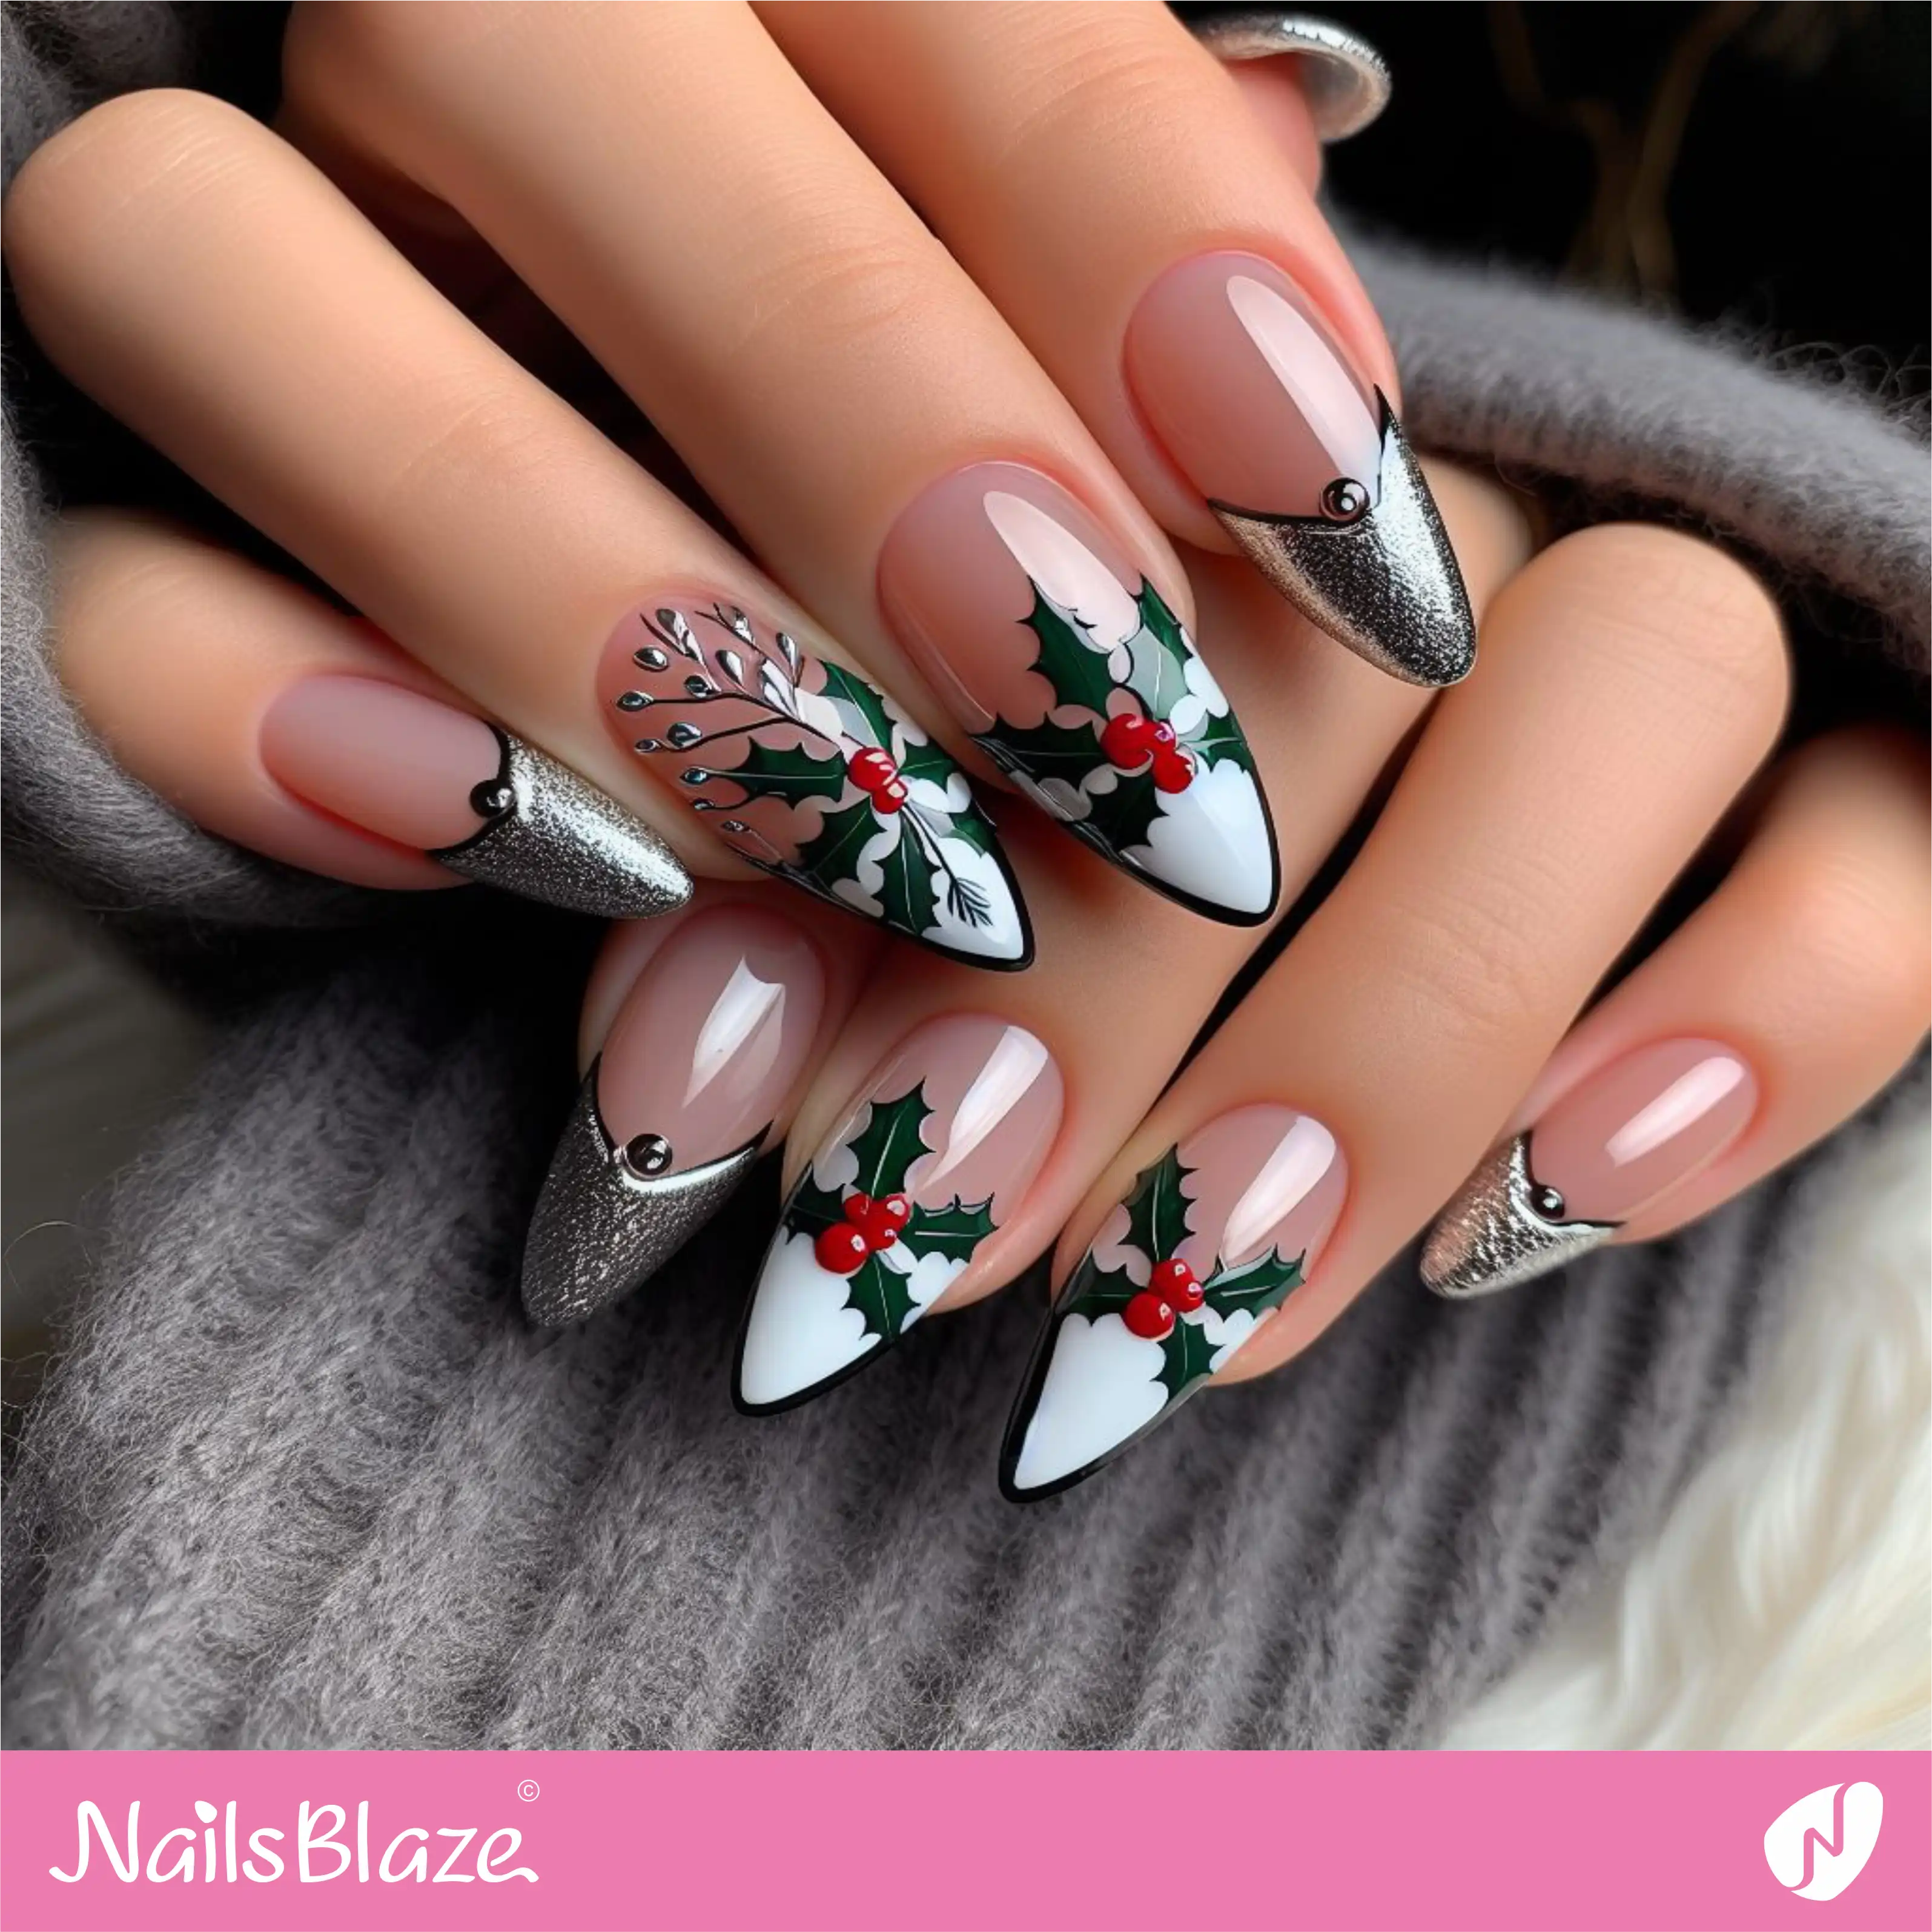 Outlined French Nails with Holly Leaf Design | Nature-inspired Nails - NB1654